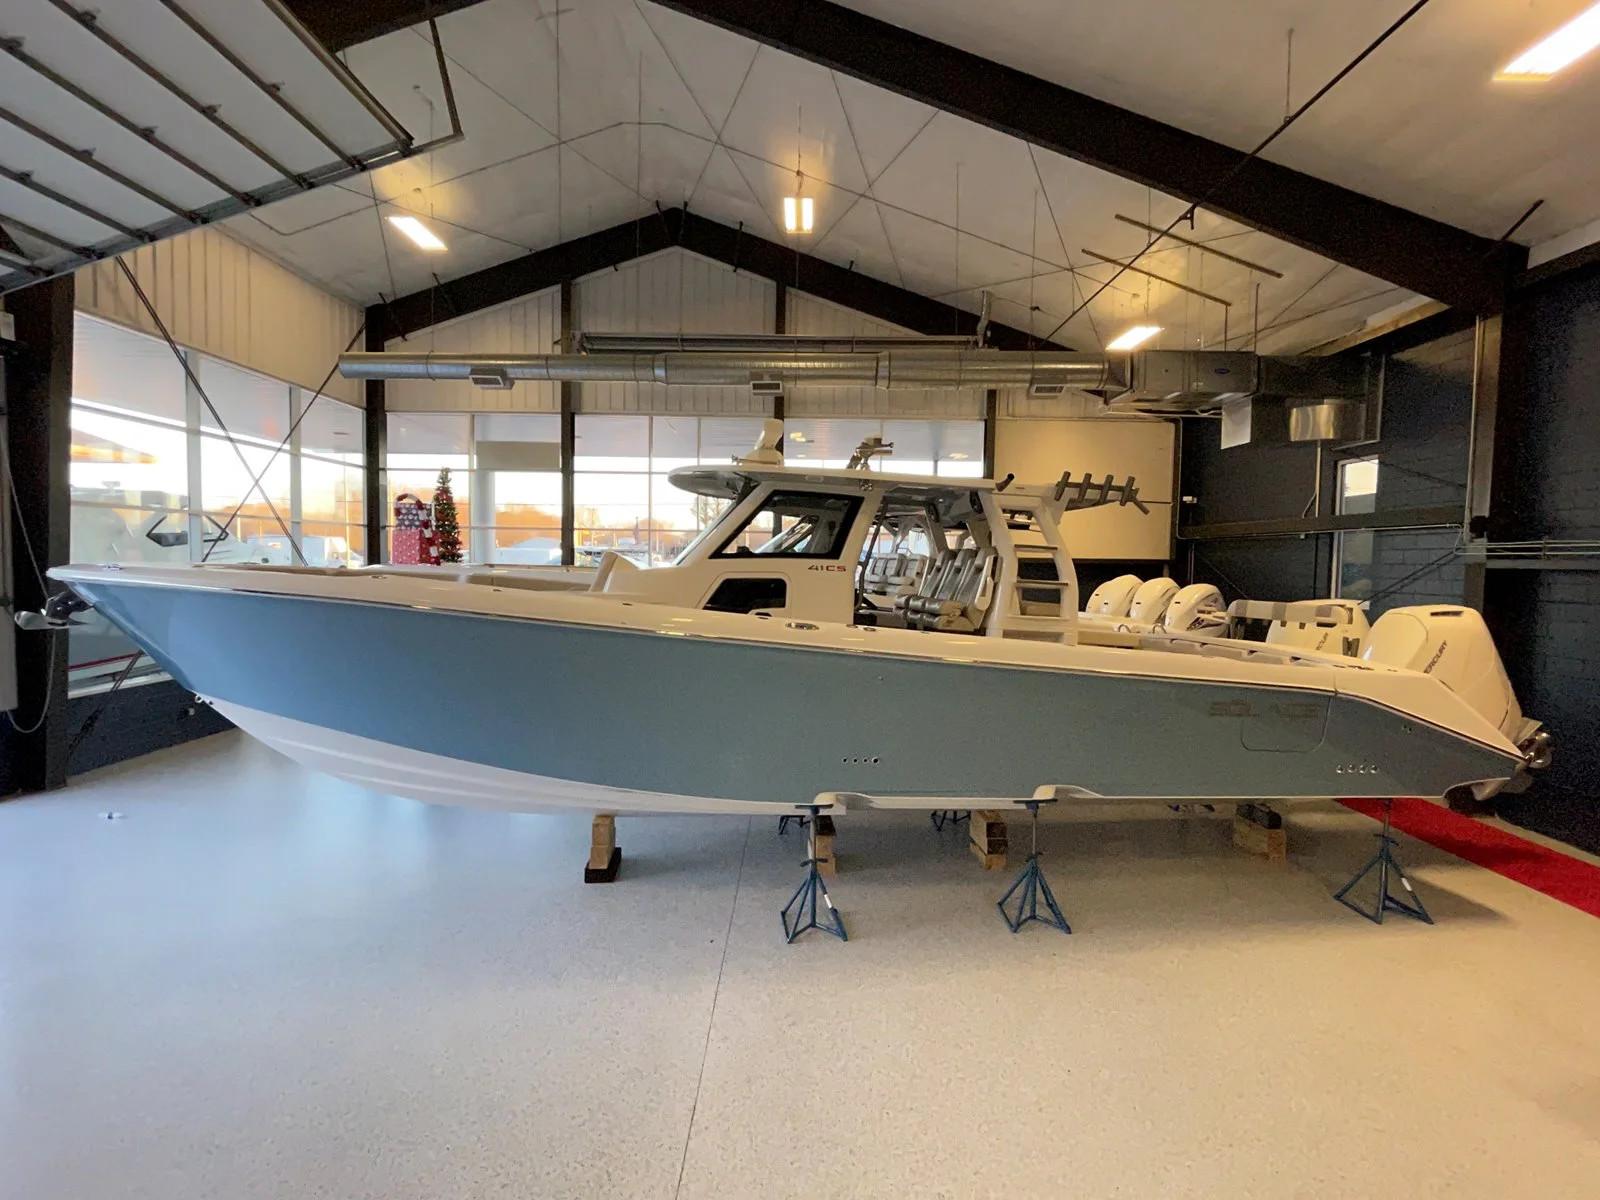 2023 Solace 30 HCS Center Console for sale - YachtWorld